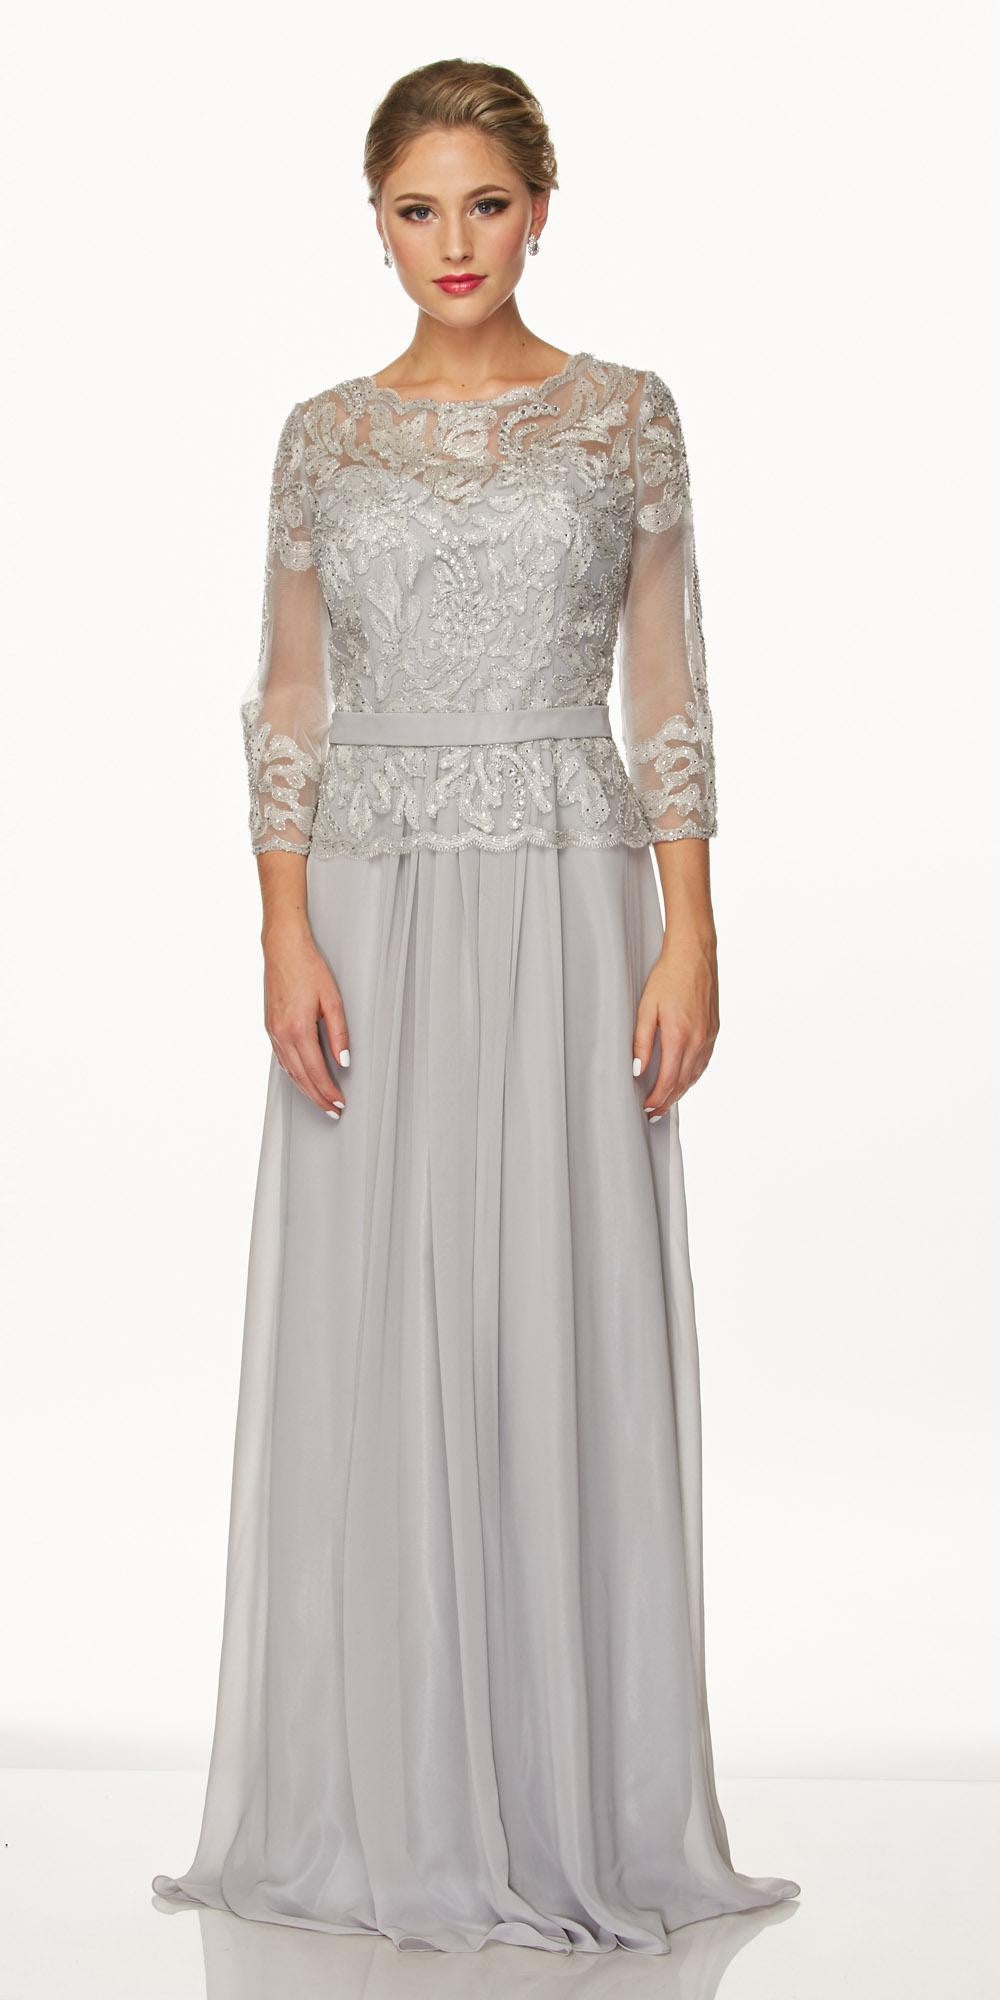 Juliet 634 Quarter Sleeve Formal Dress with Lace Applique Bodice Silver